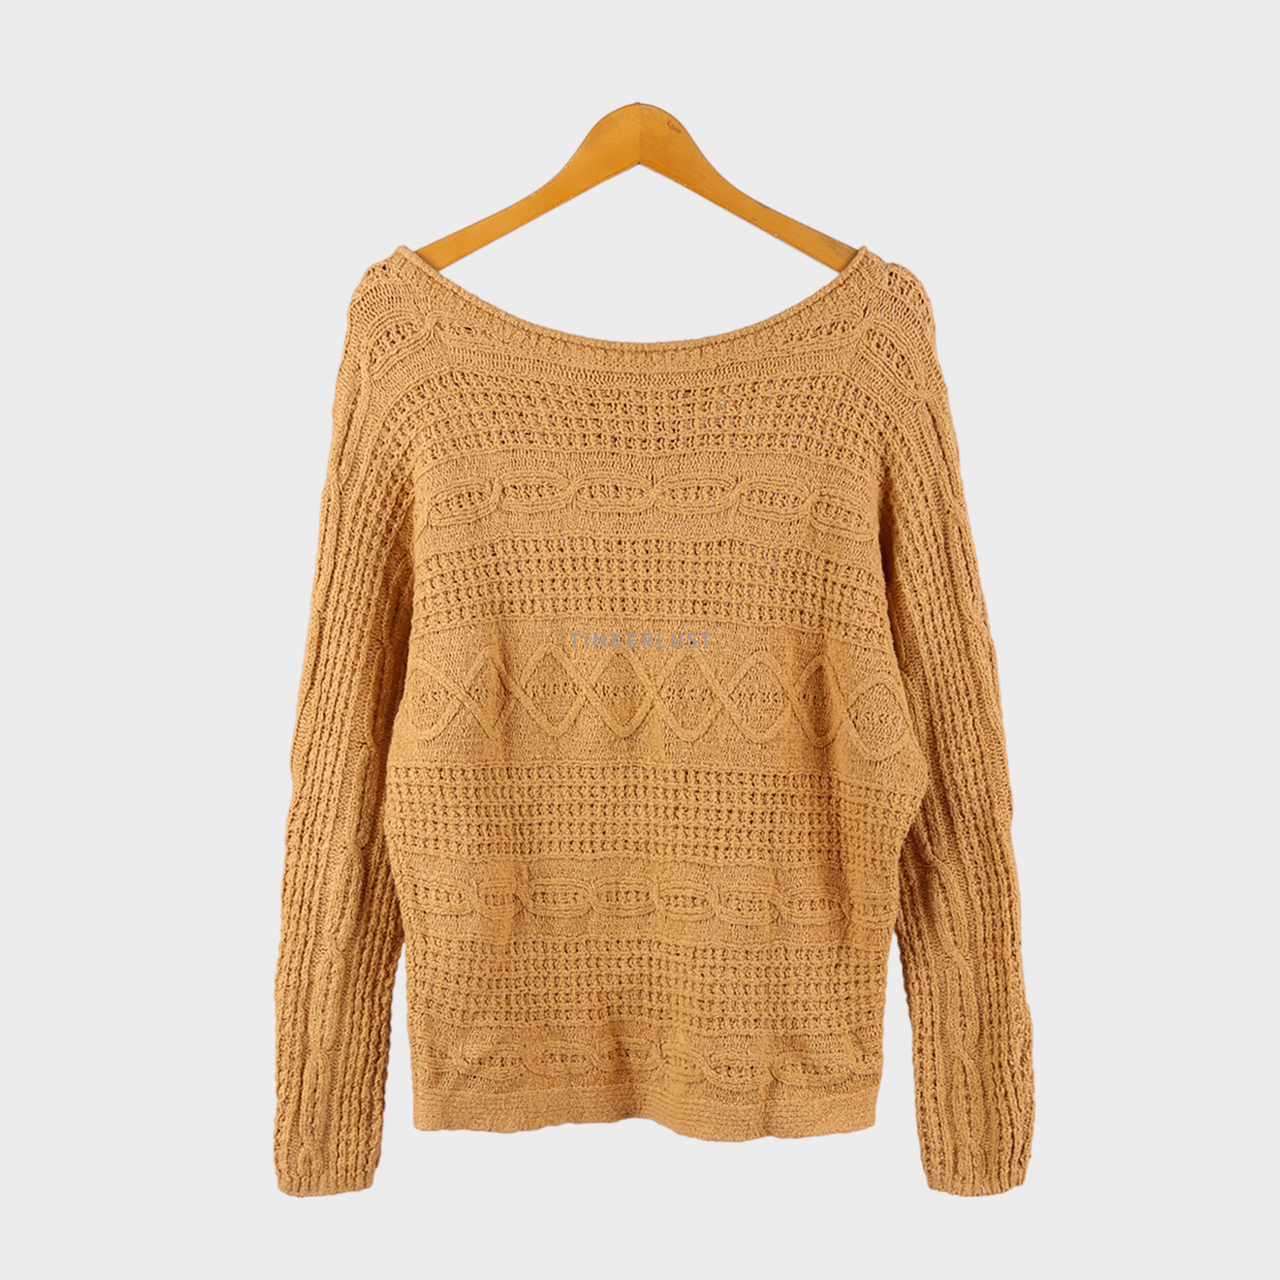 Abercrombie & Fitch Soft Mustard Sweater